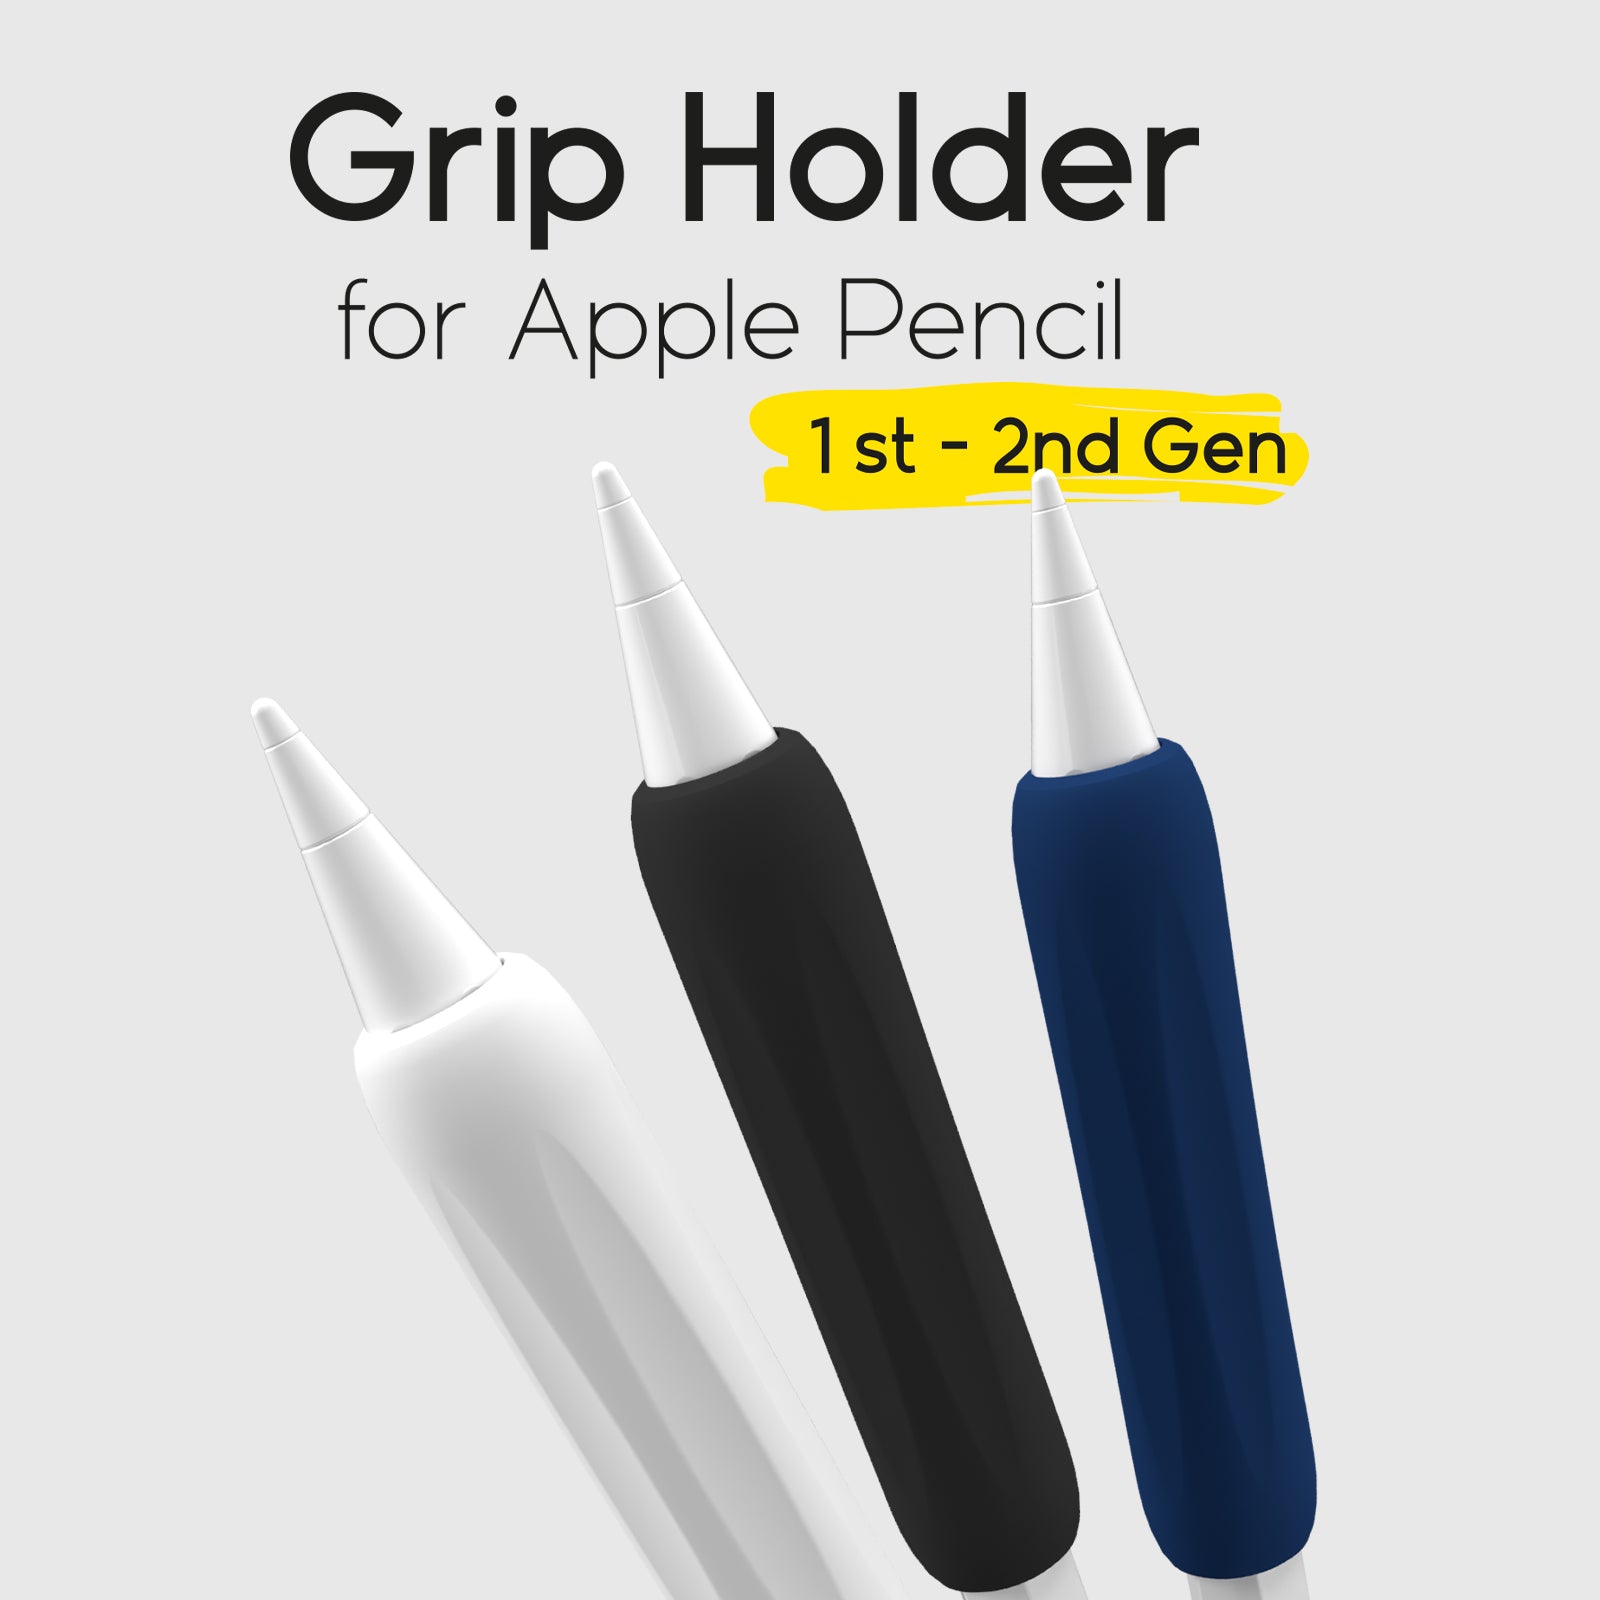 Bundle with Skin for Apple Pencil and Film for iPad Pro 11/Air